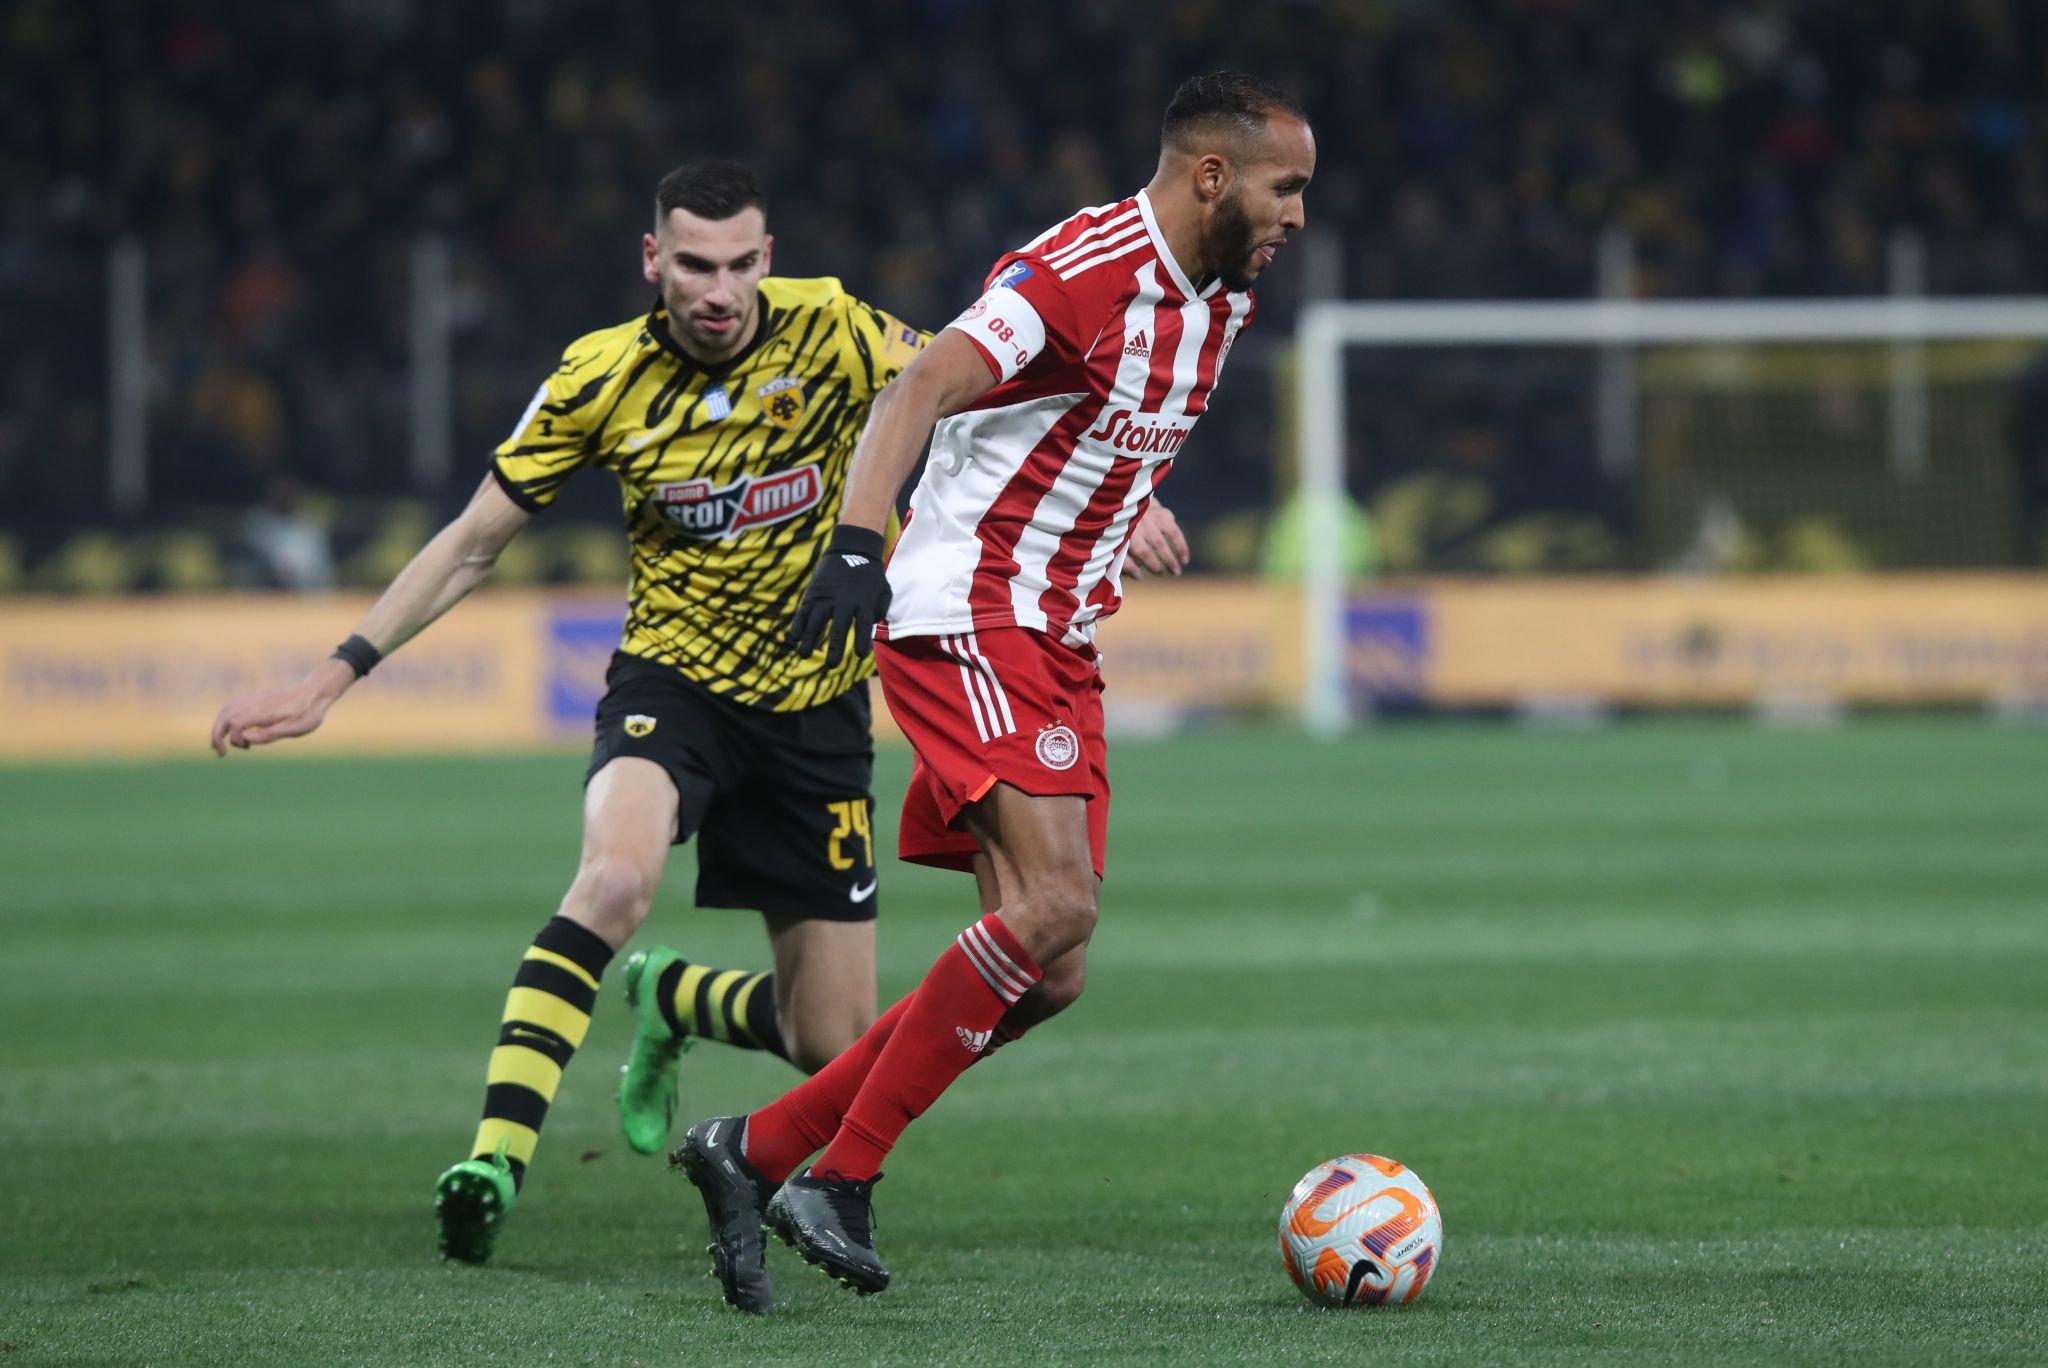 A defeat for Olympiacos